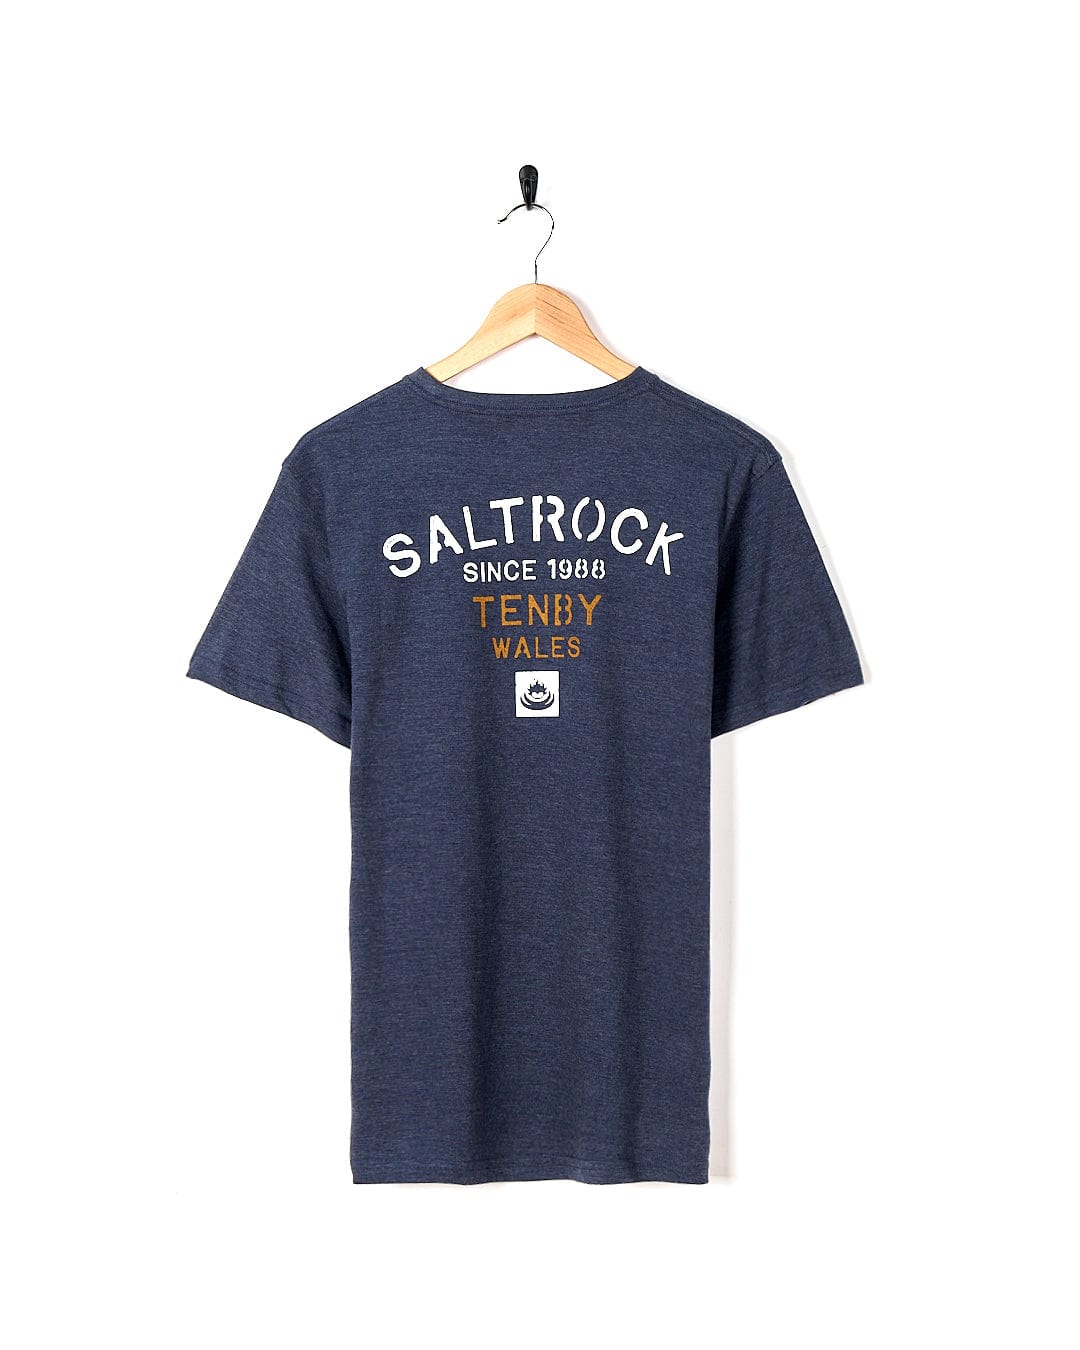 A Stencil - Mens Location T-Shirt - Tenby - Dress Blue with the brand name Saltrock on it.